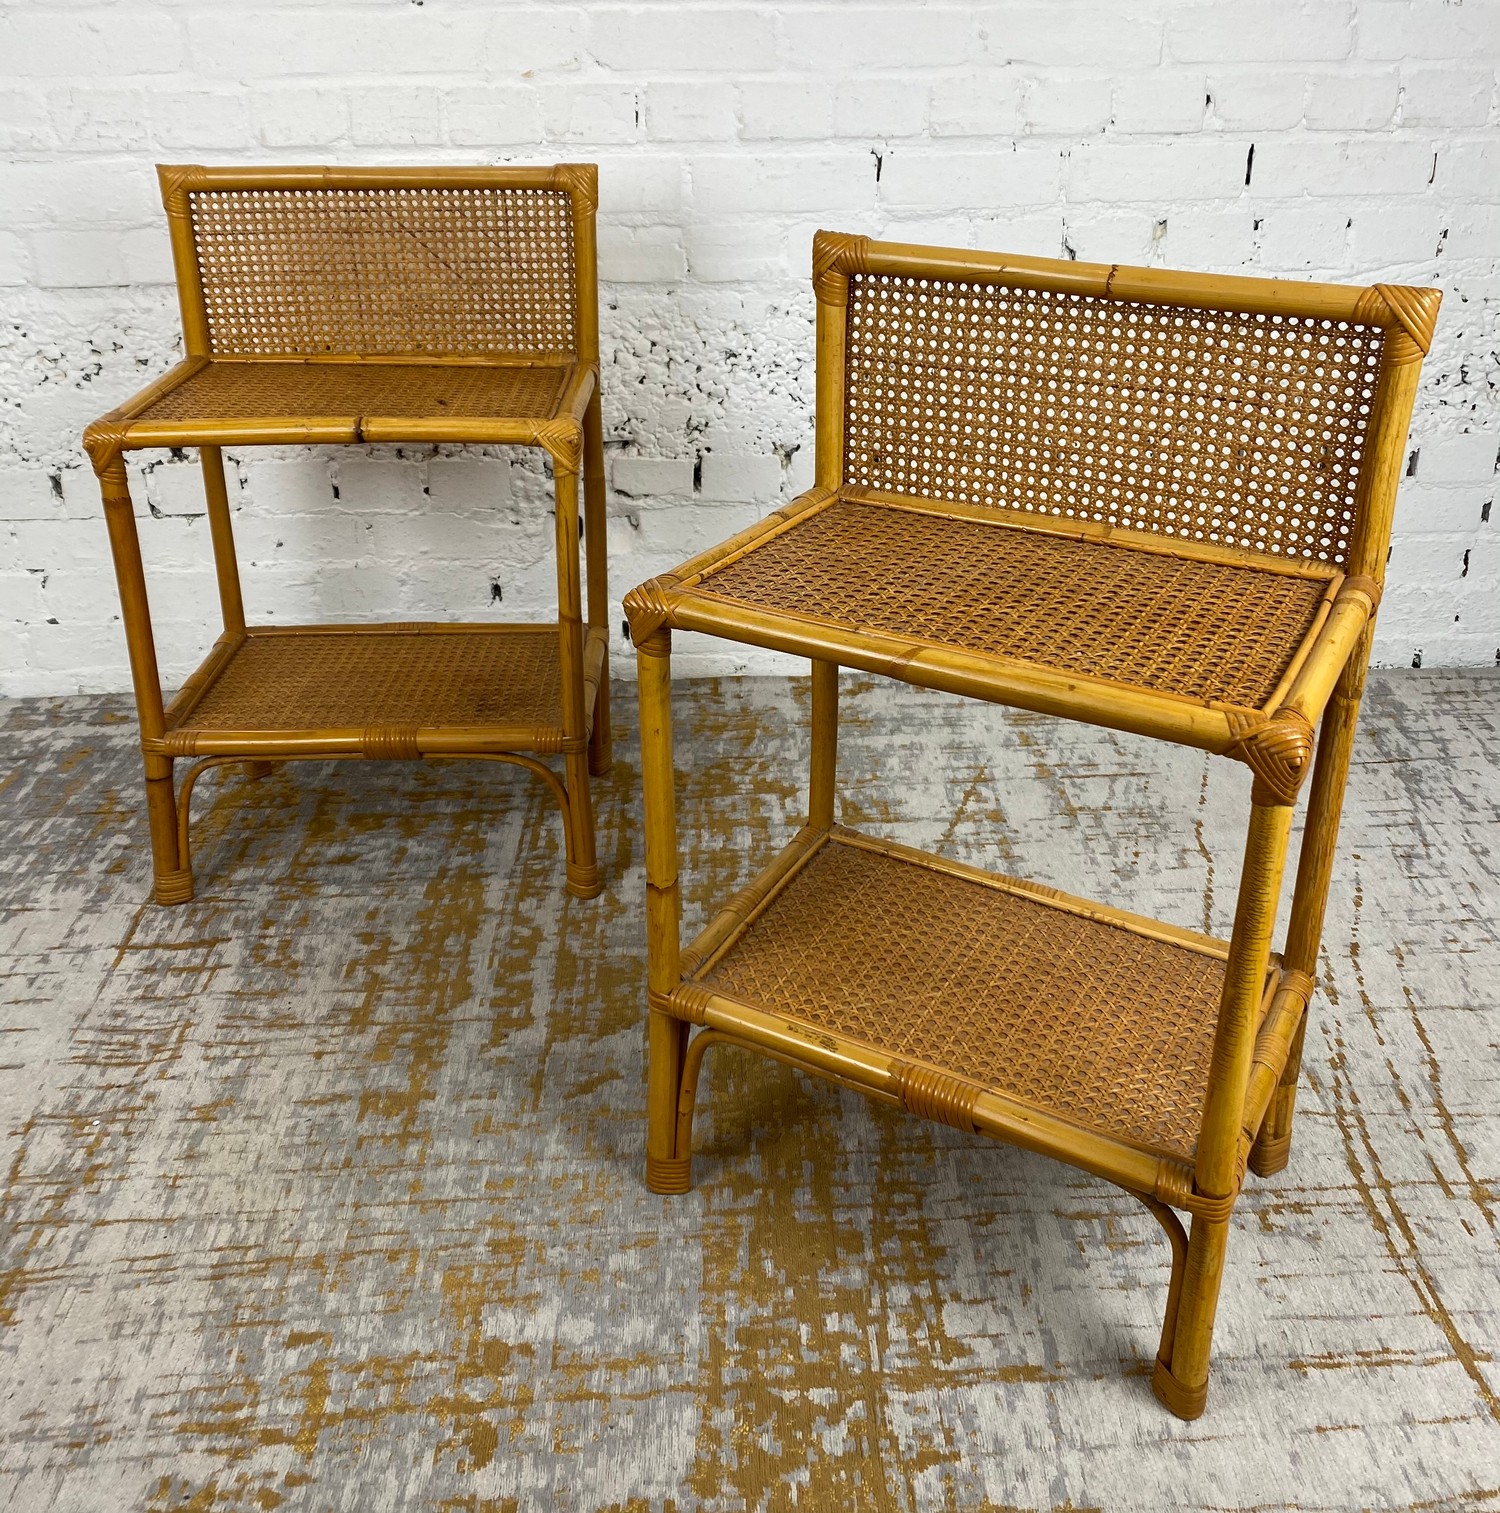 BEDSIDE/LAMP TABLES, a pair, vintage 1970's rattan and bamboo, 73cm H x 46cm x 31cm together with - Image 3 of 6